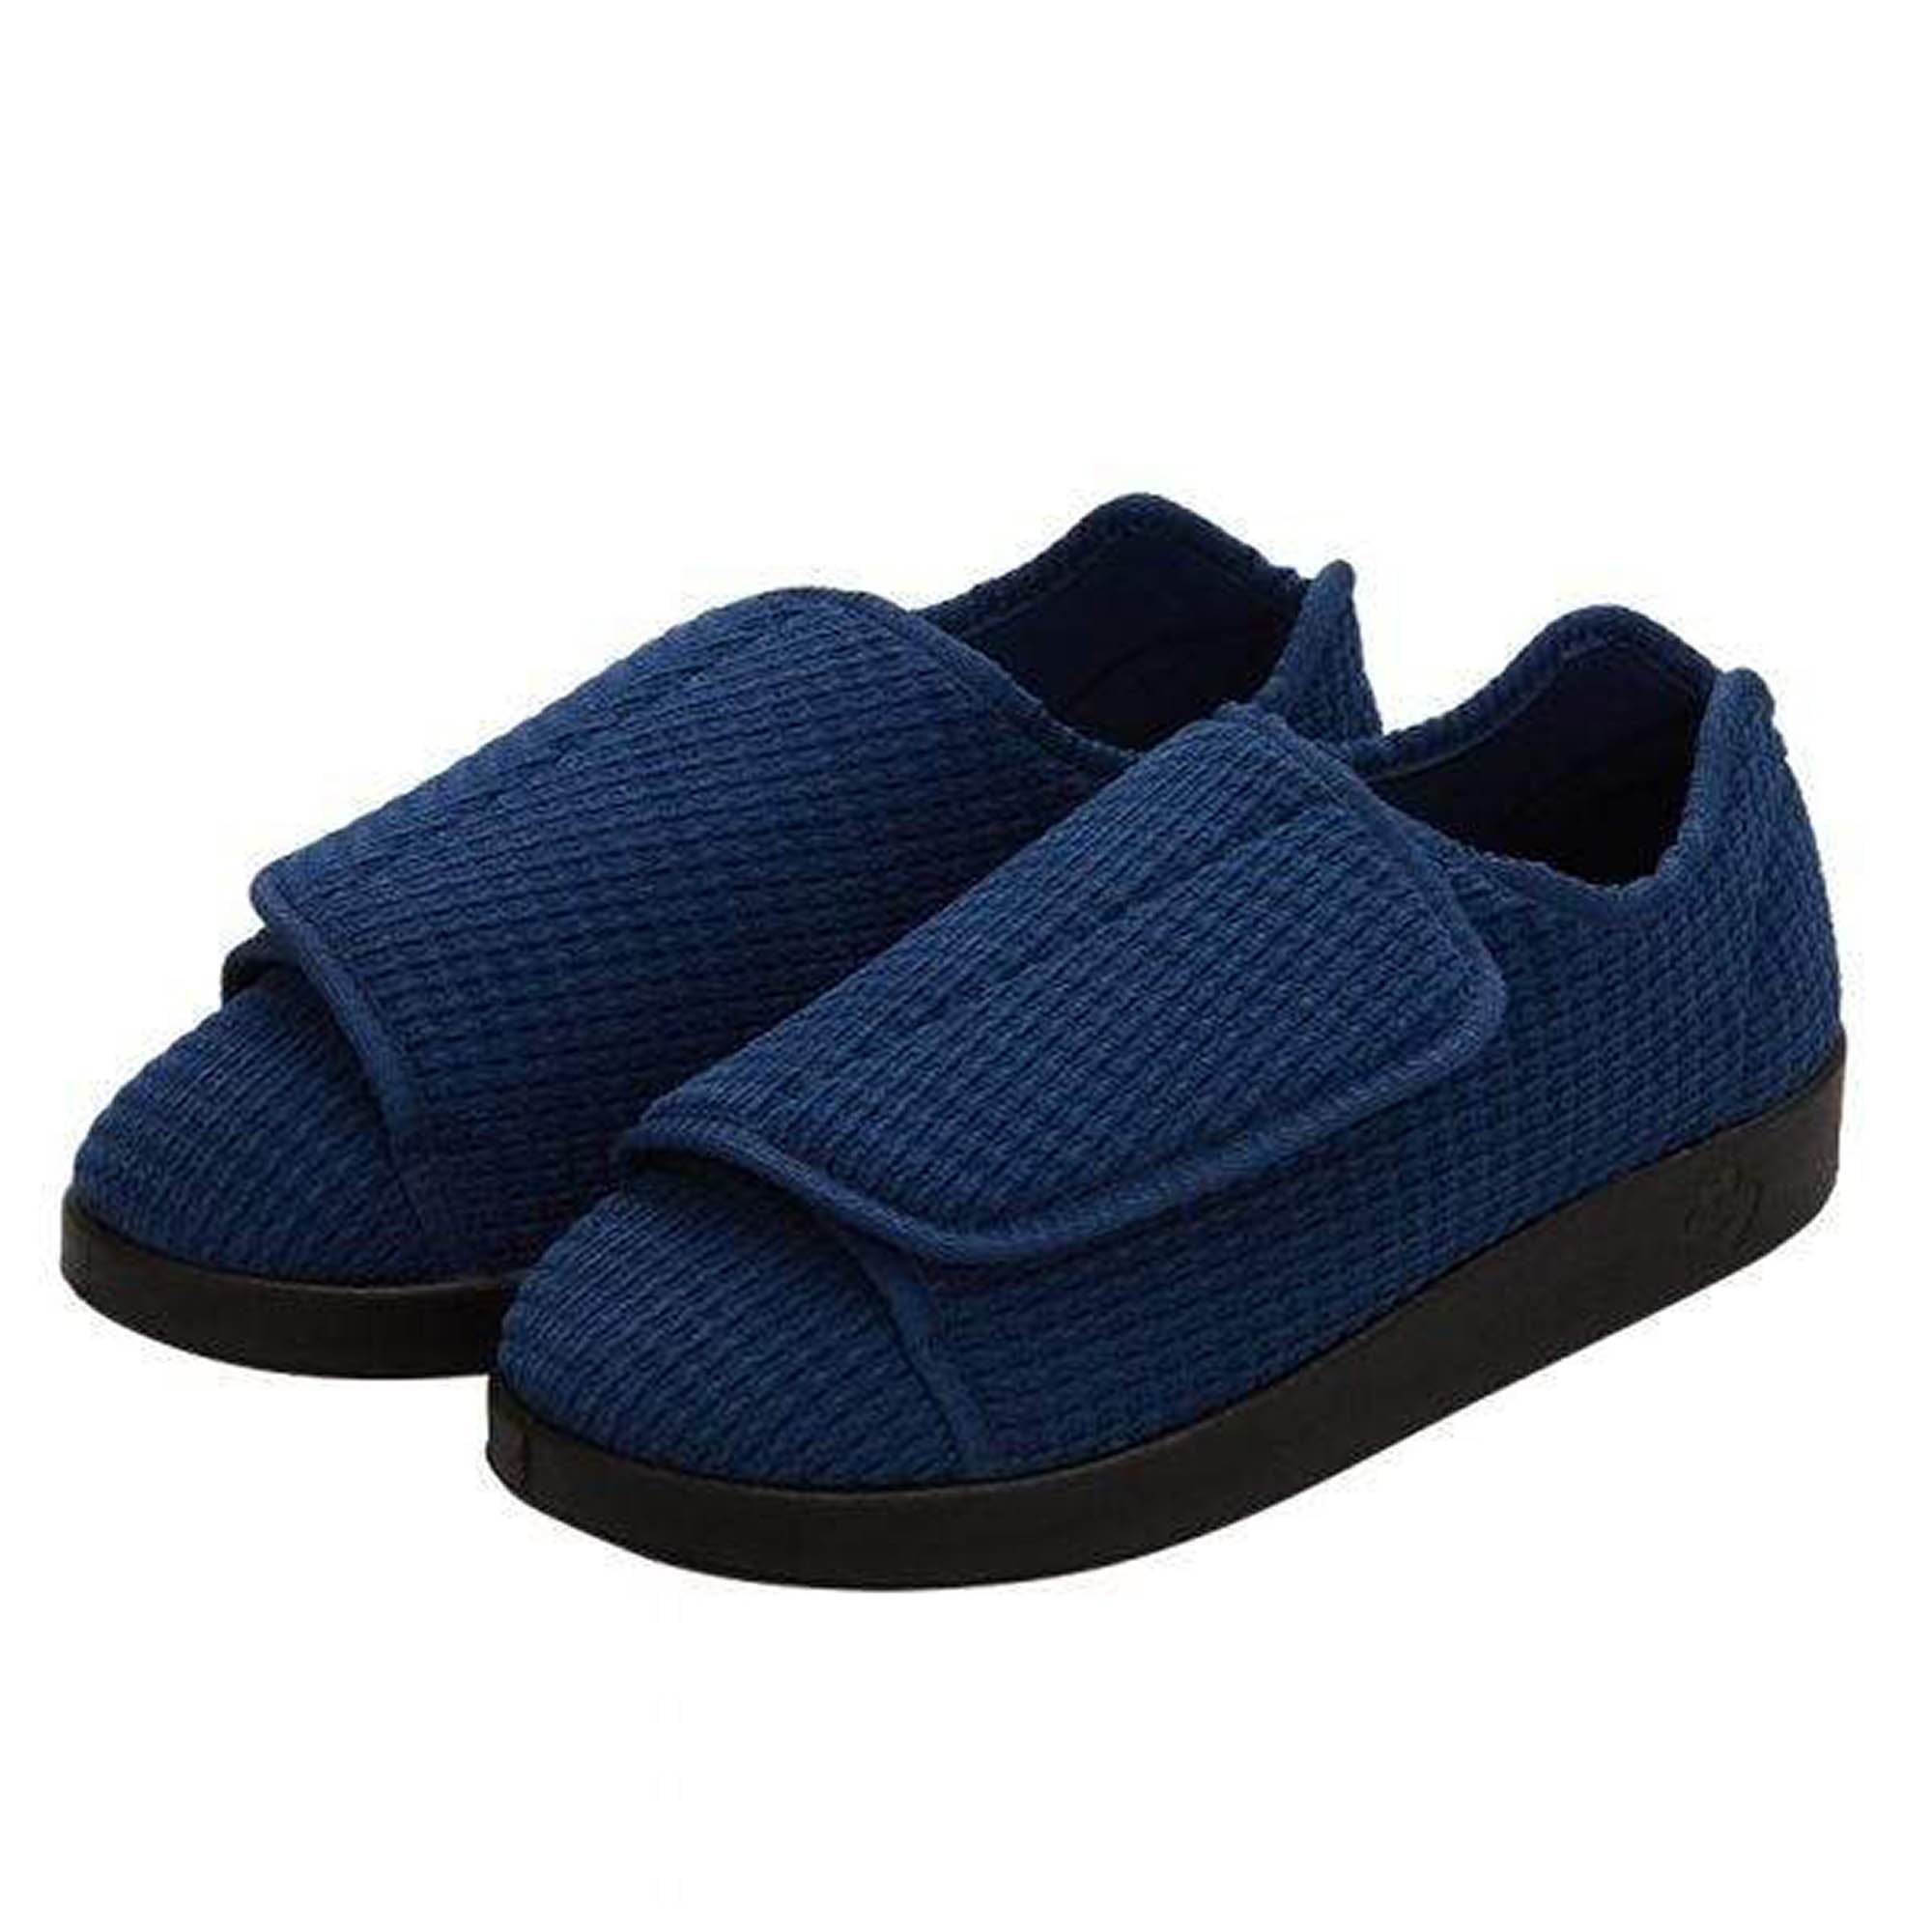 Silverts Men's Extra Extra Wide Slip-Resistant Slippers - Black - 13